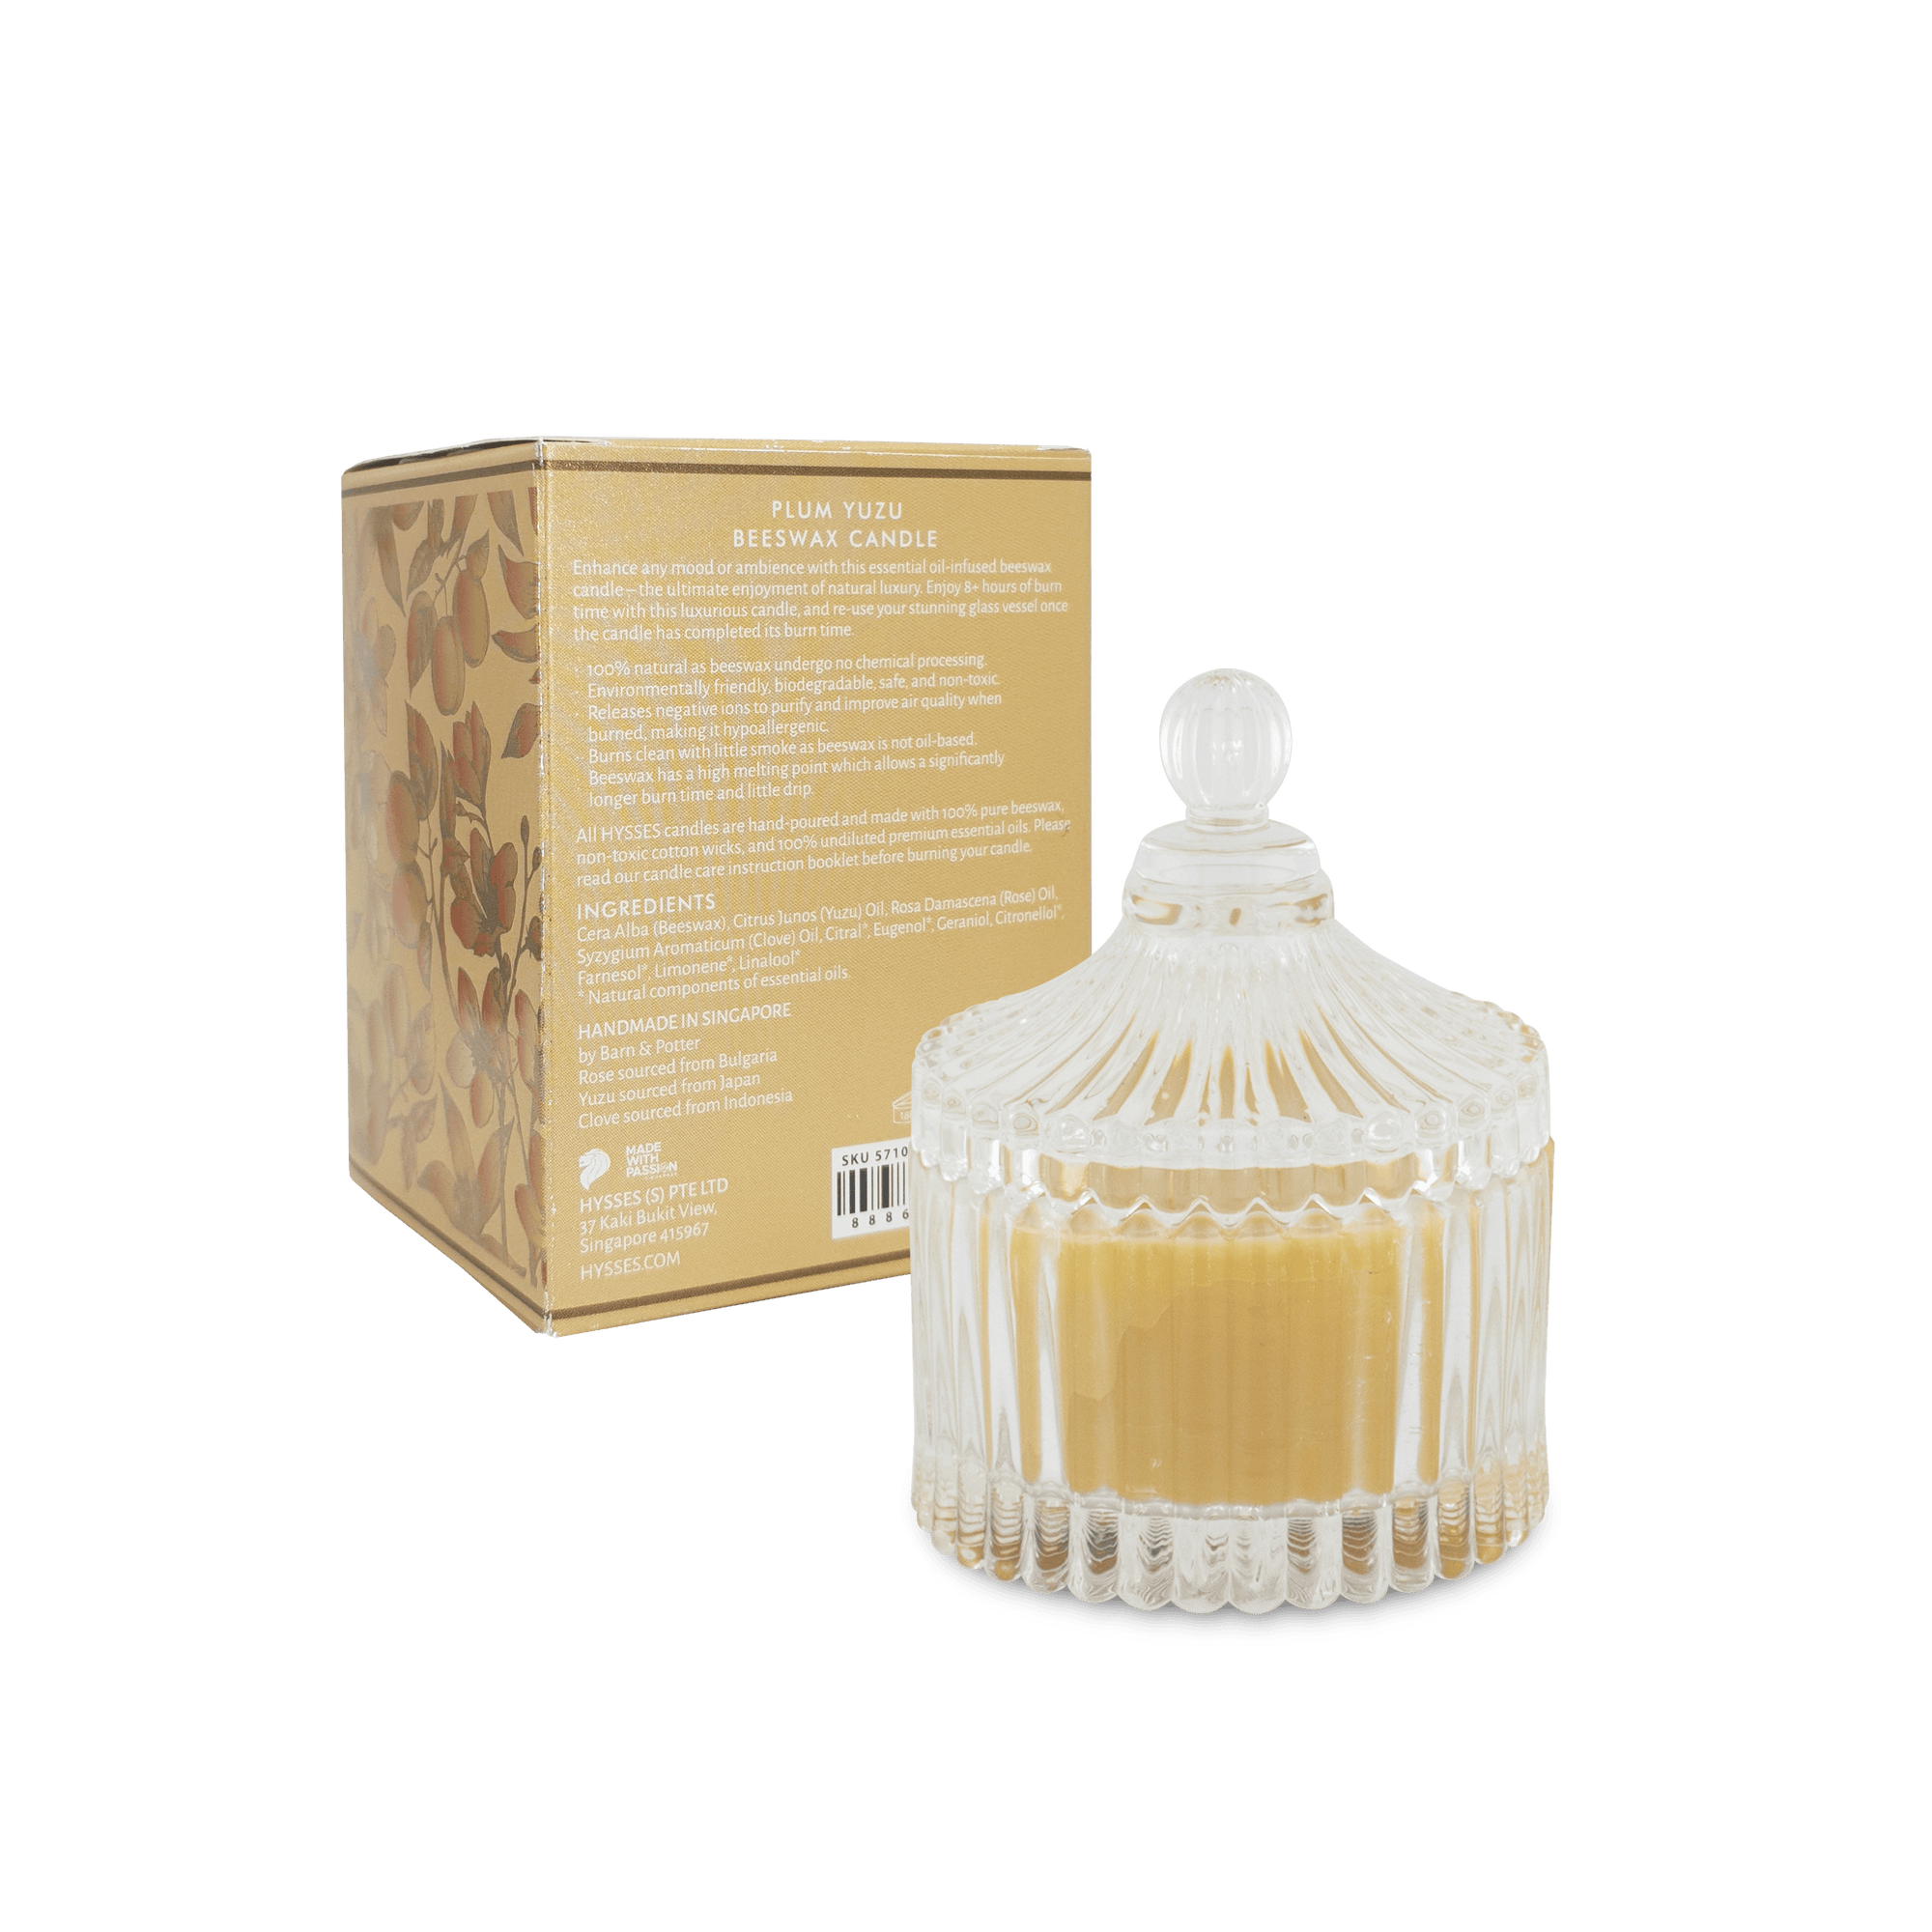 Hysses Home Scents 100g Beeswax Candle Plum Yuzu 200g